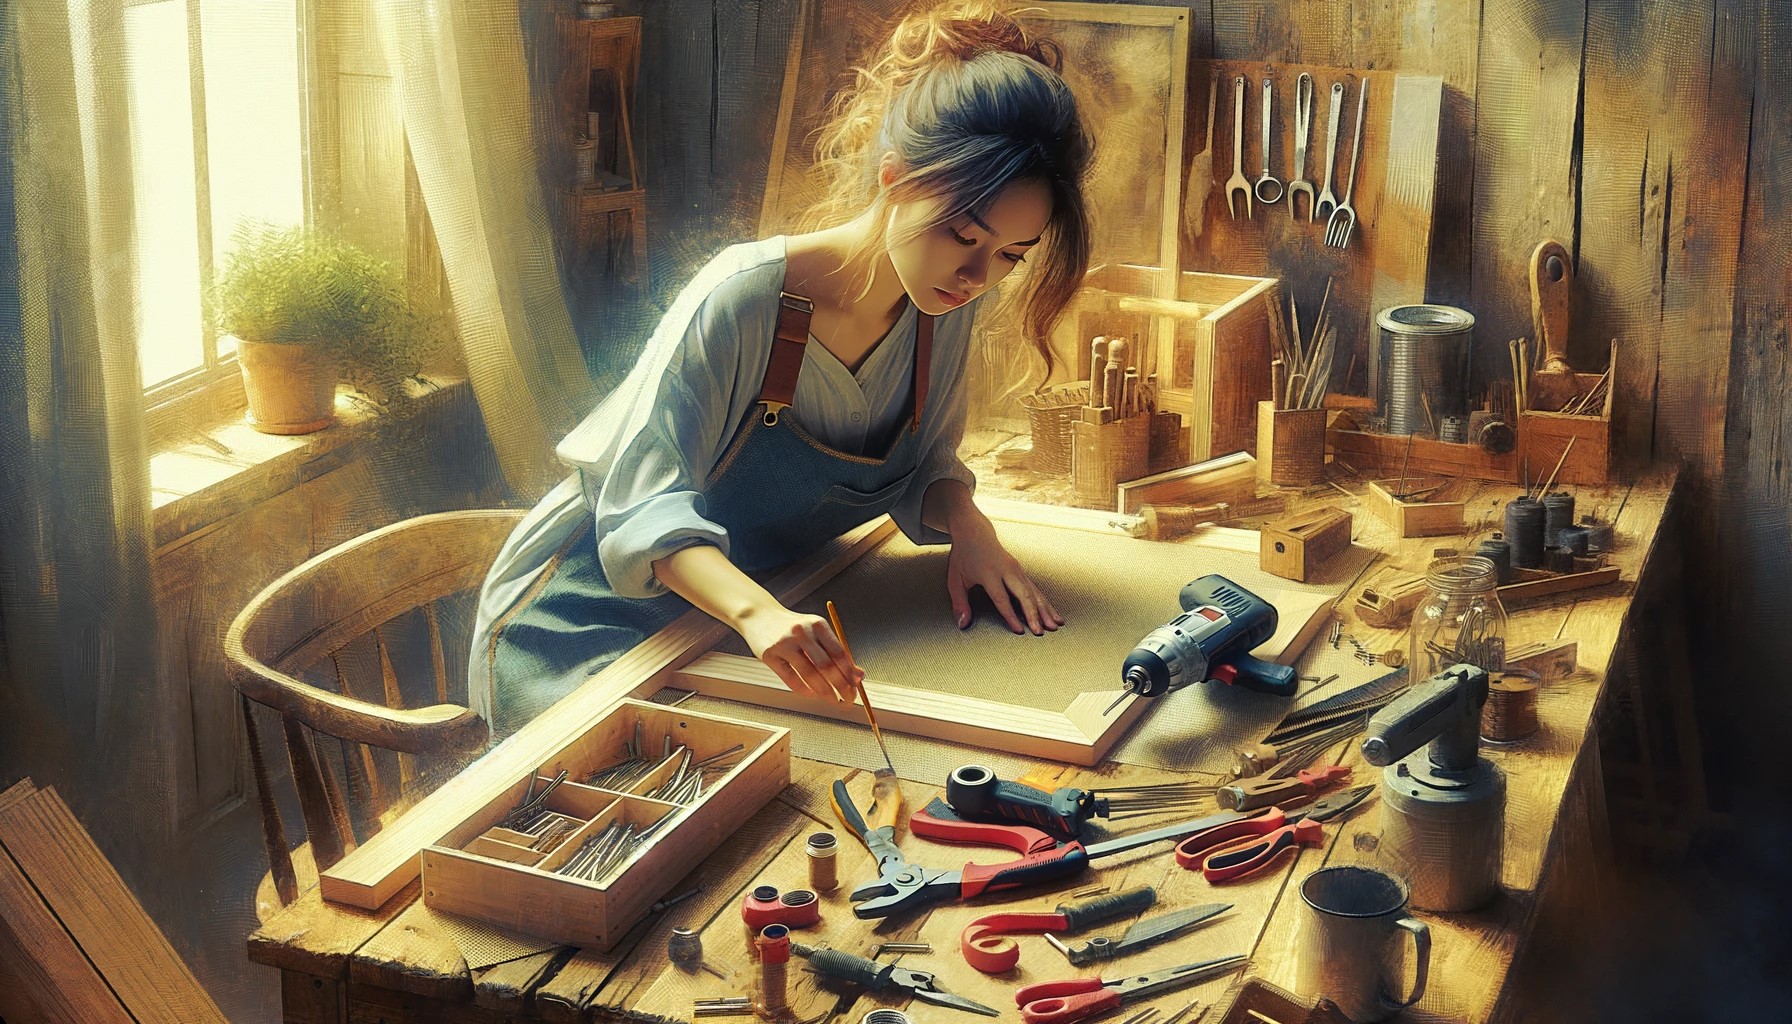 a woman engaged in a DIY project, working intensely at a workbench with tools spread around in a well-lit room